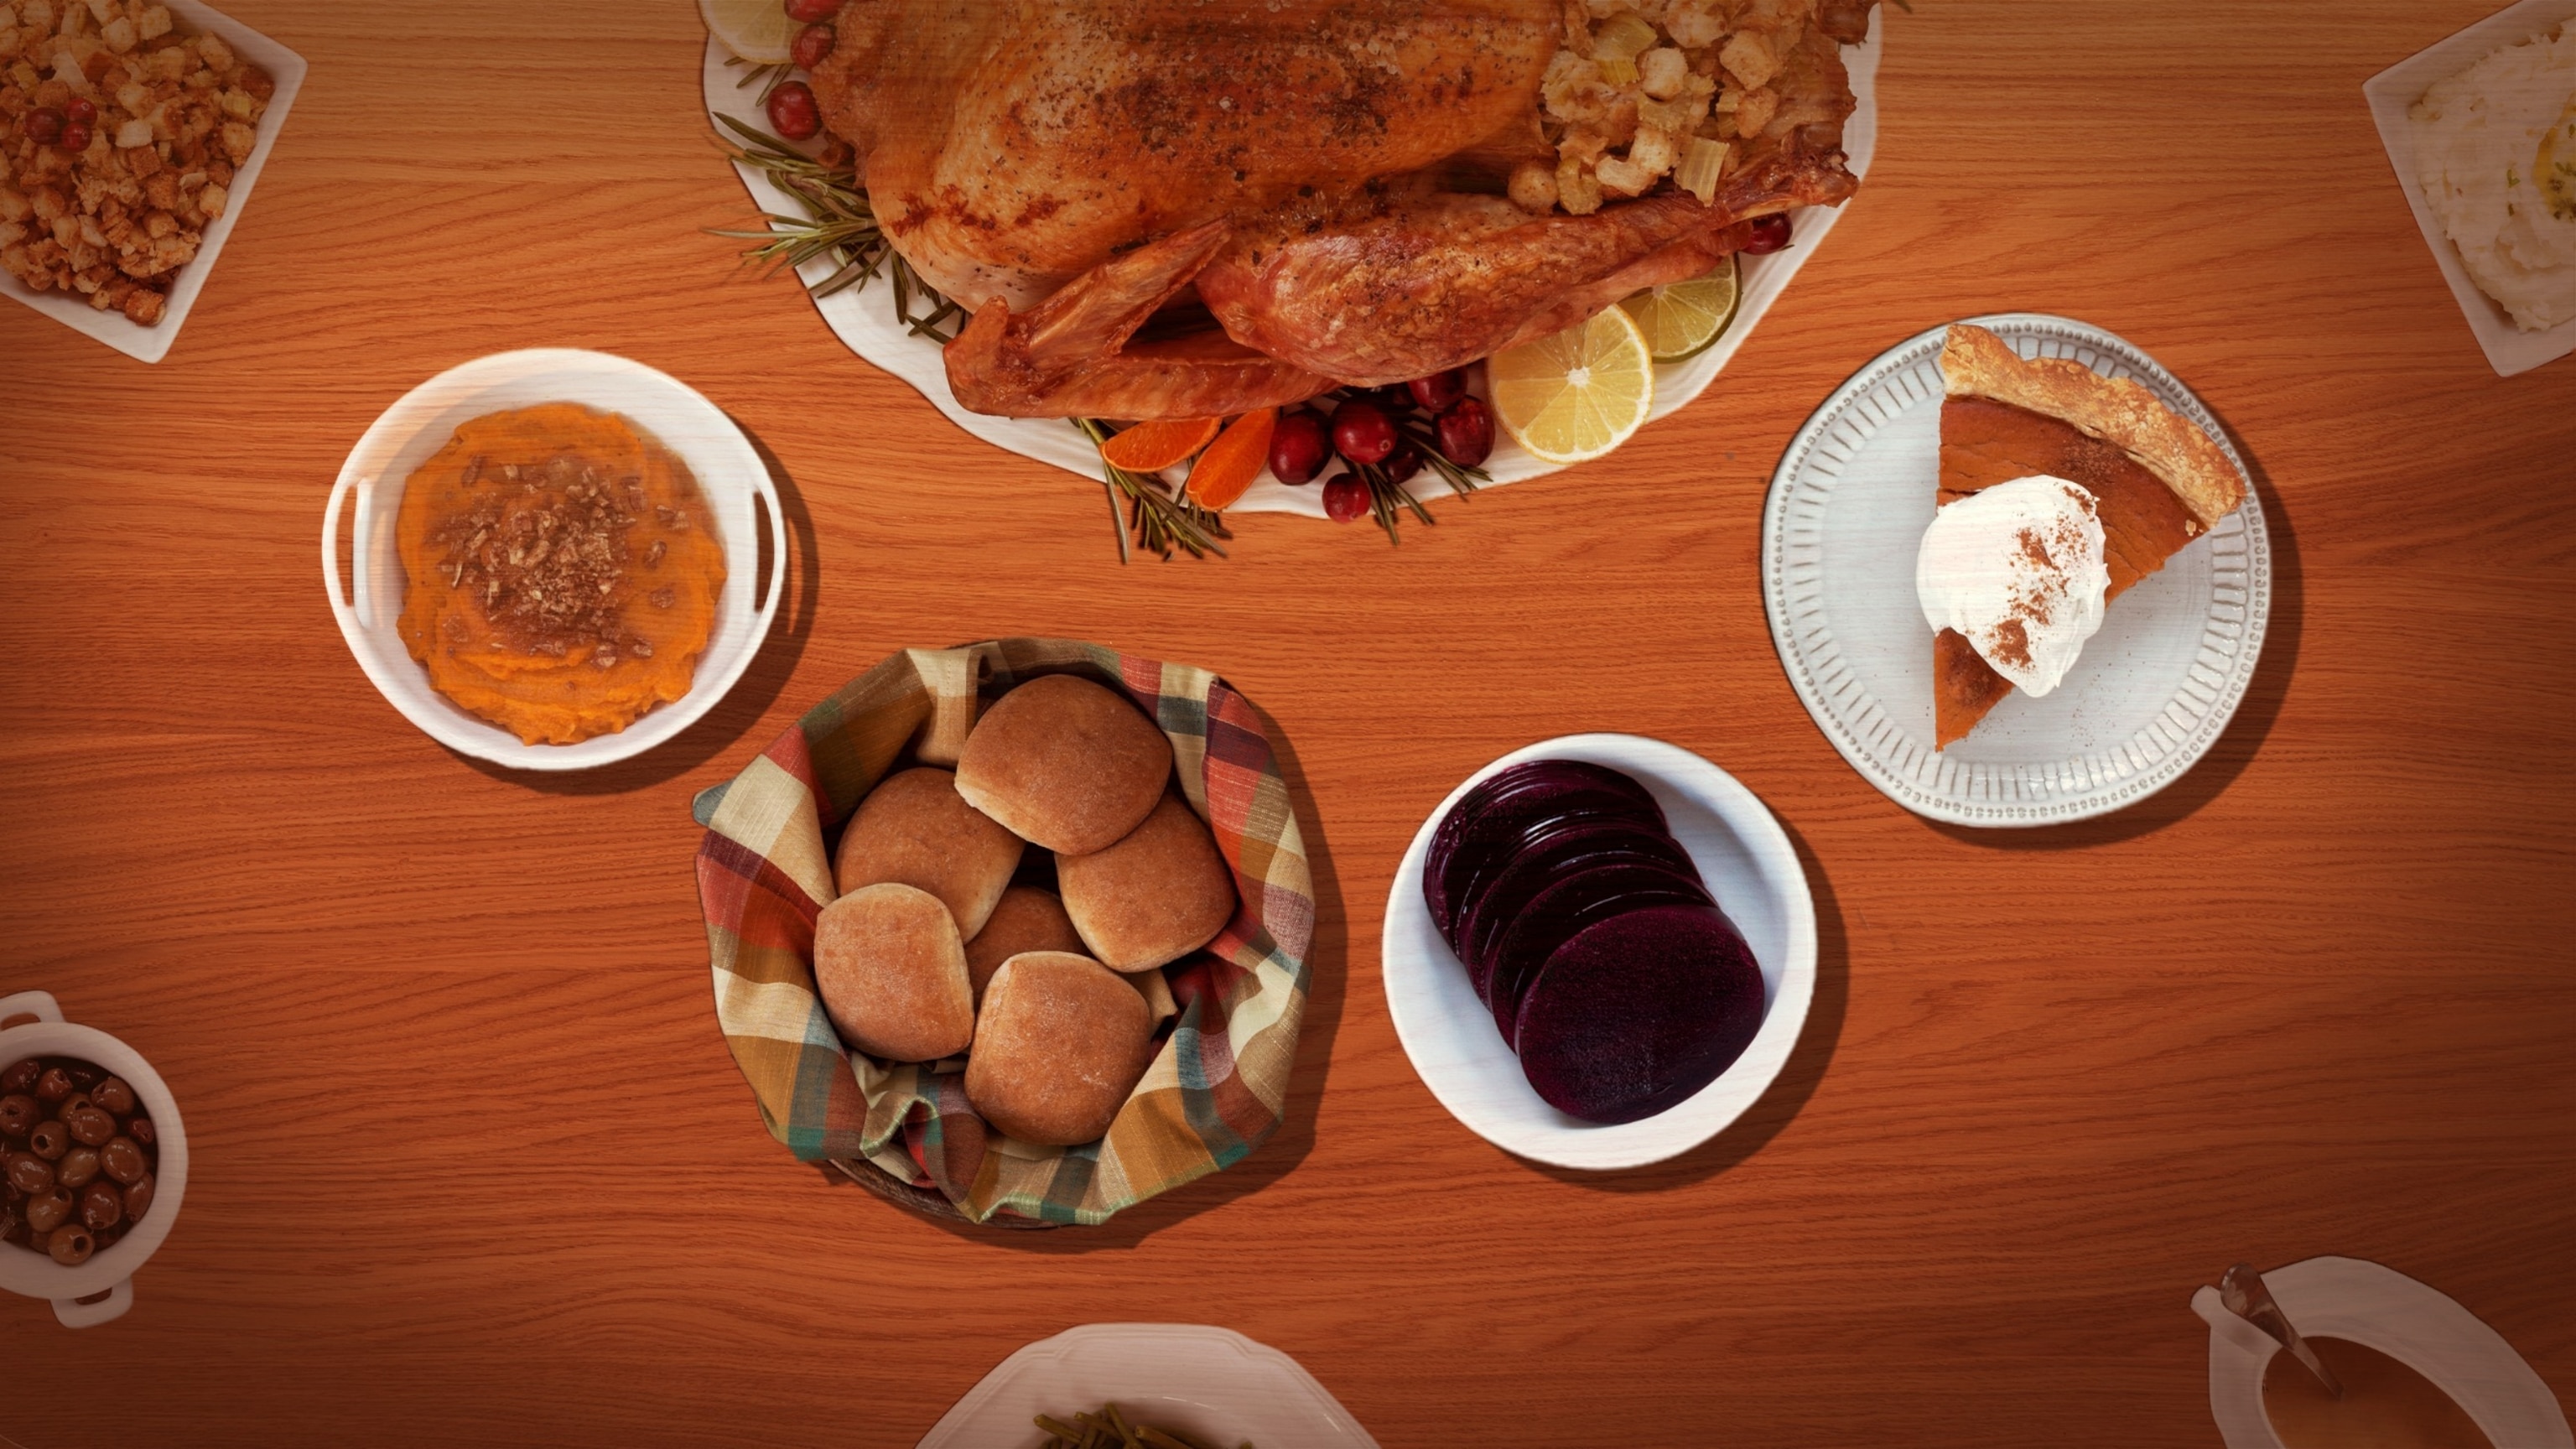 Climate change could make several key Thanksgiving ingredients more scarce in the future. 